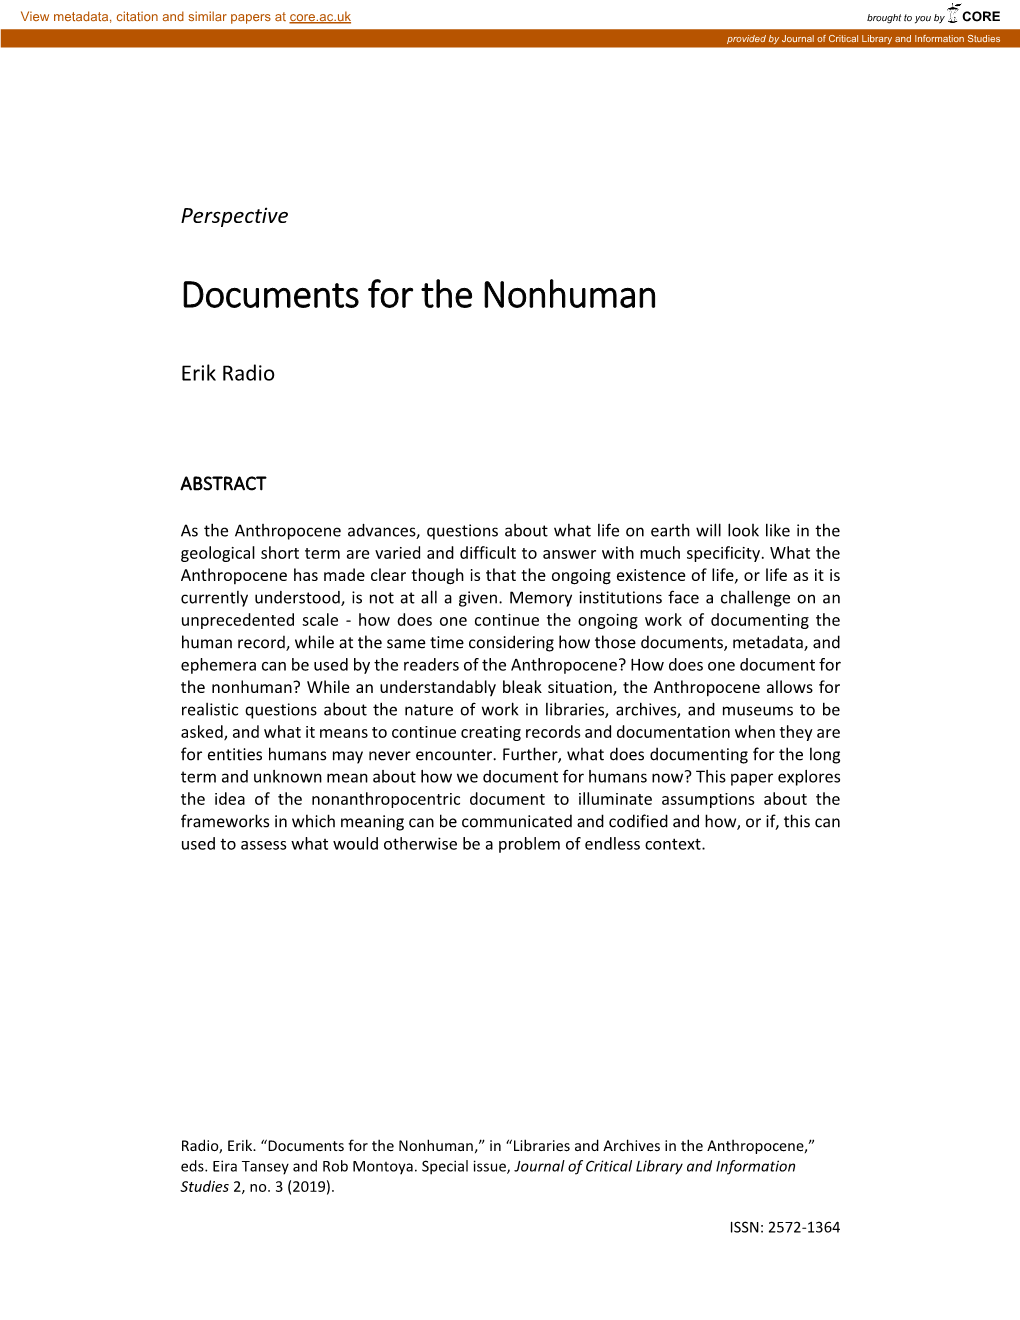 Documents for the Nonhuman